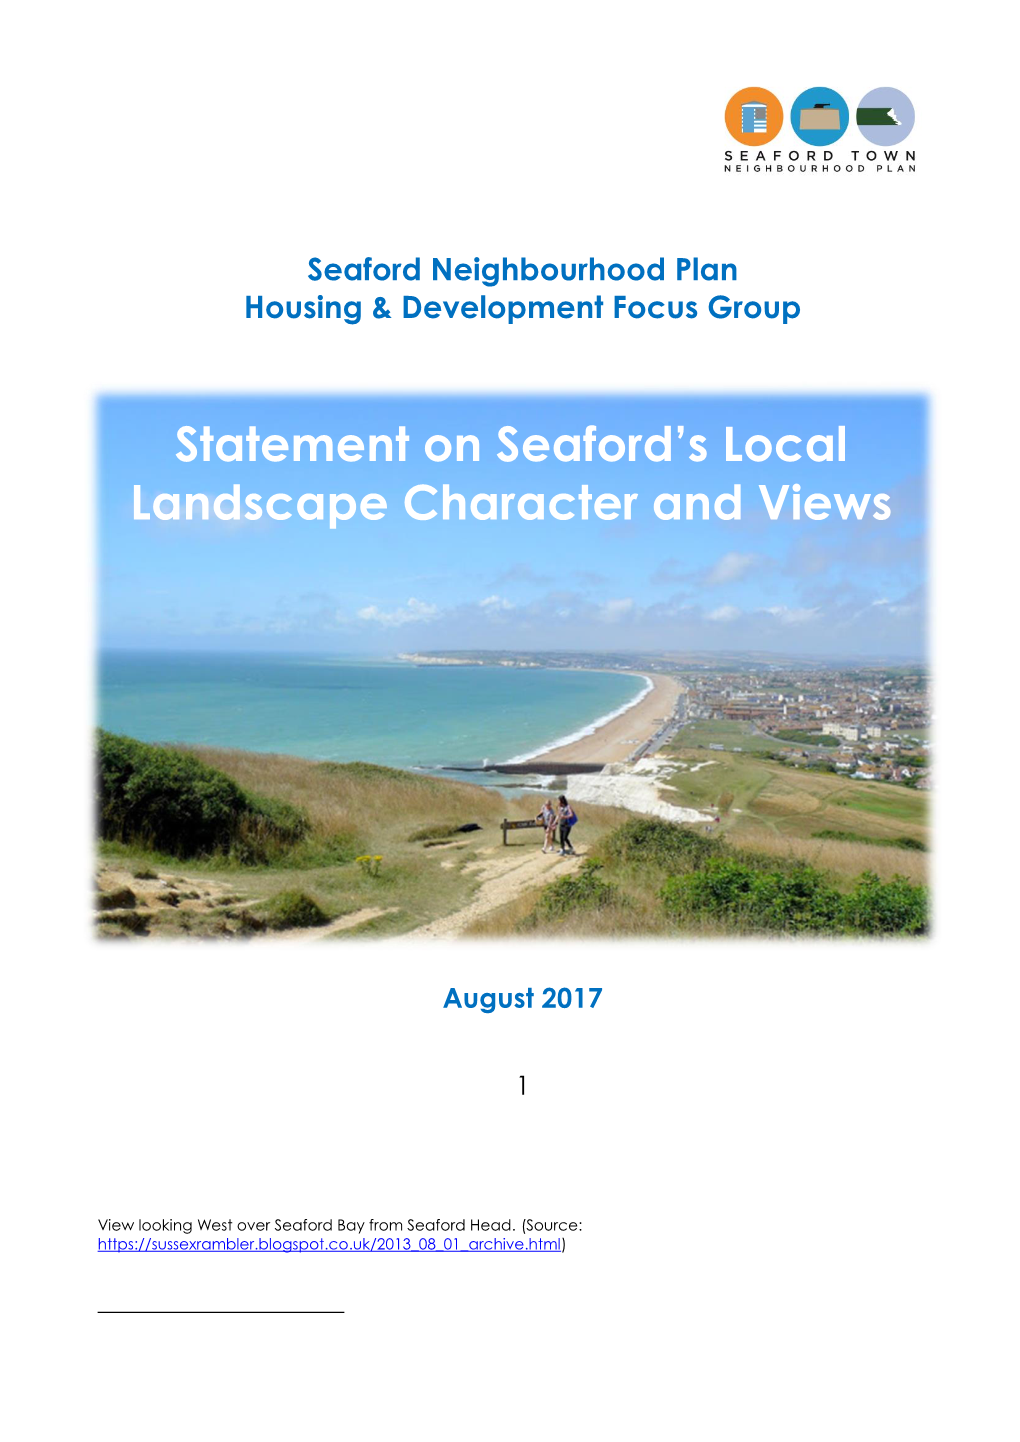 Statement on Seaford's Local Landscape Character and Views